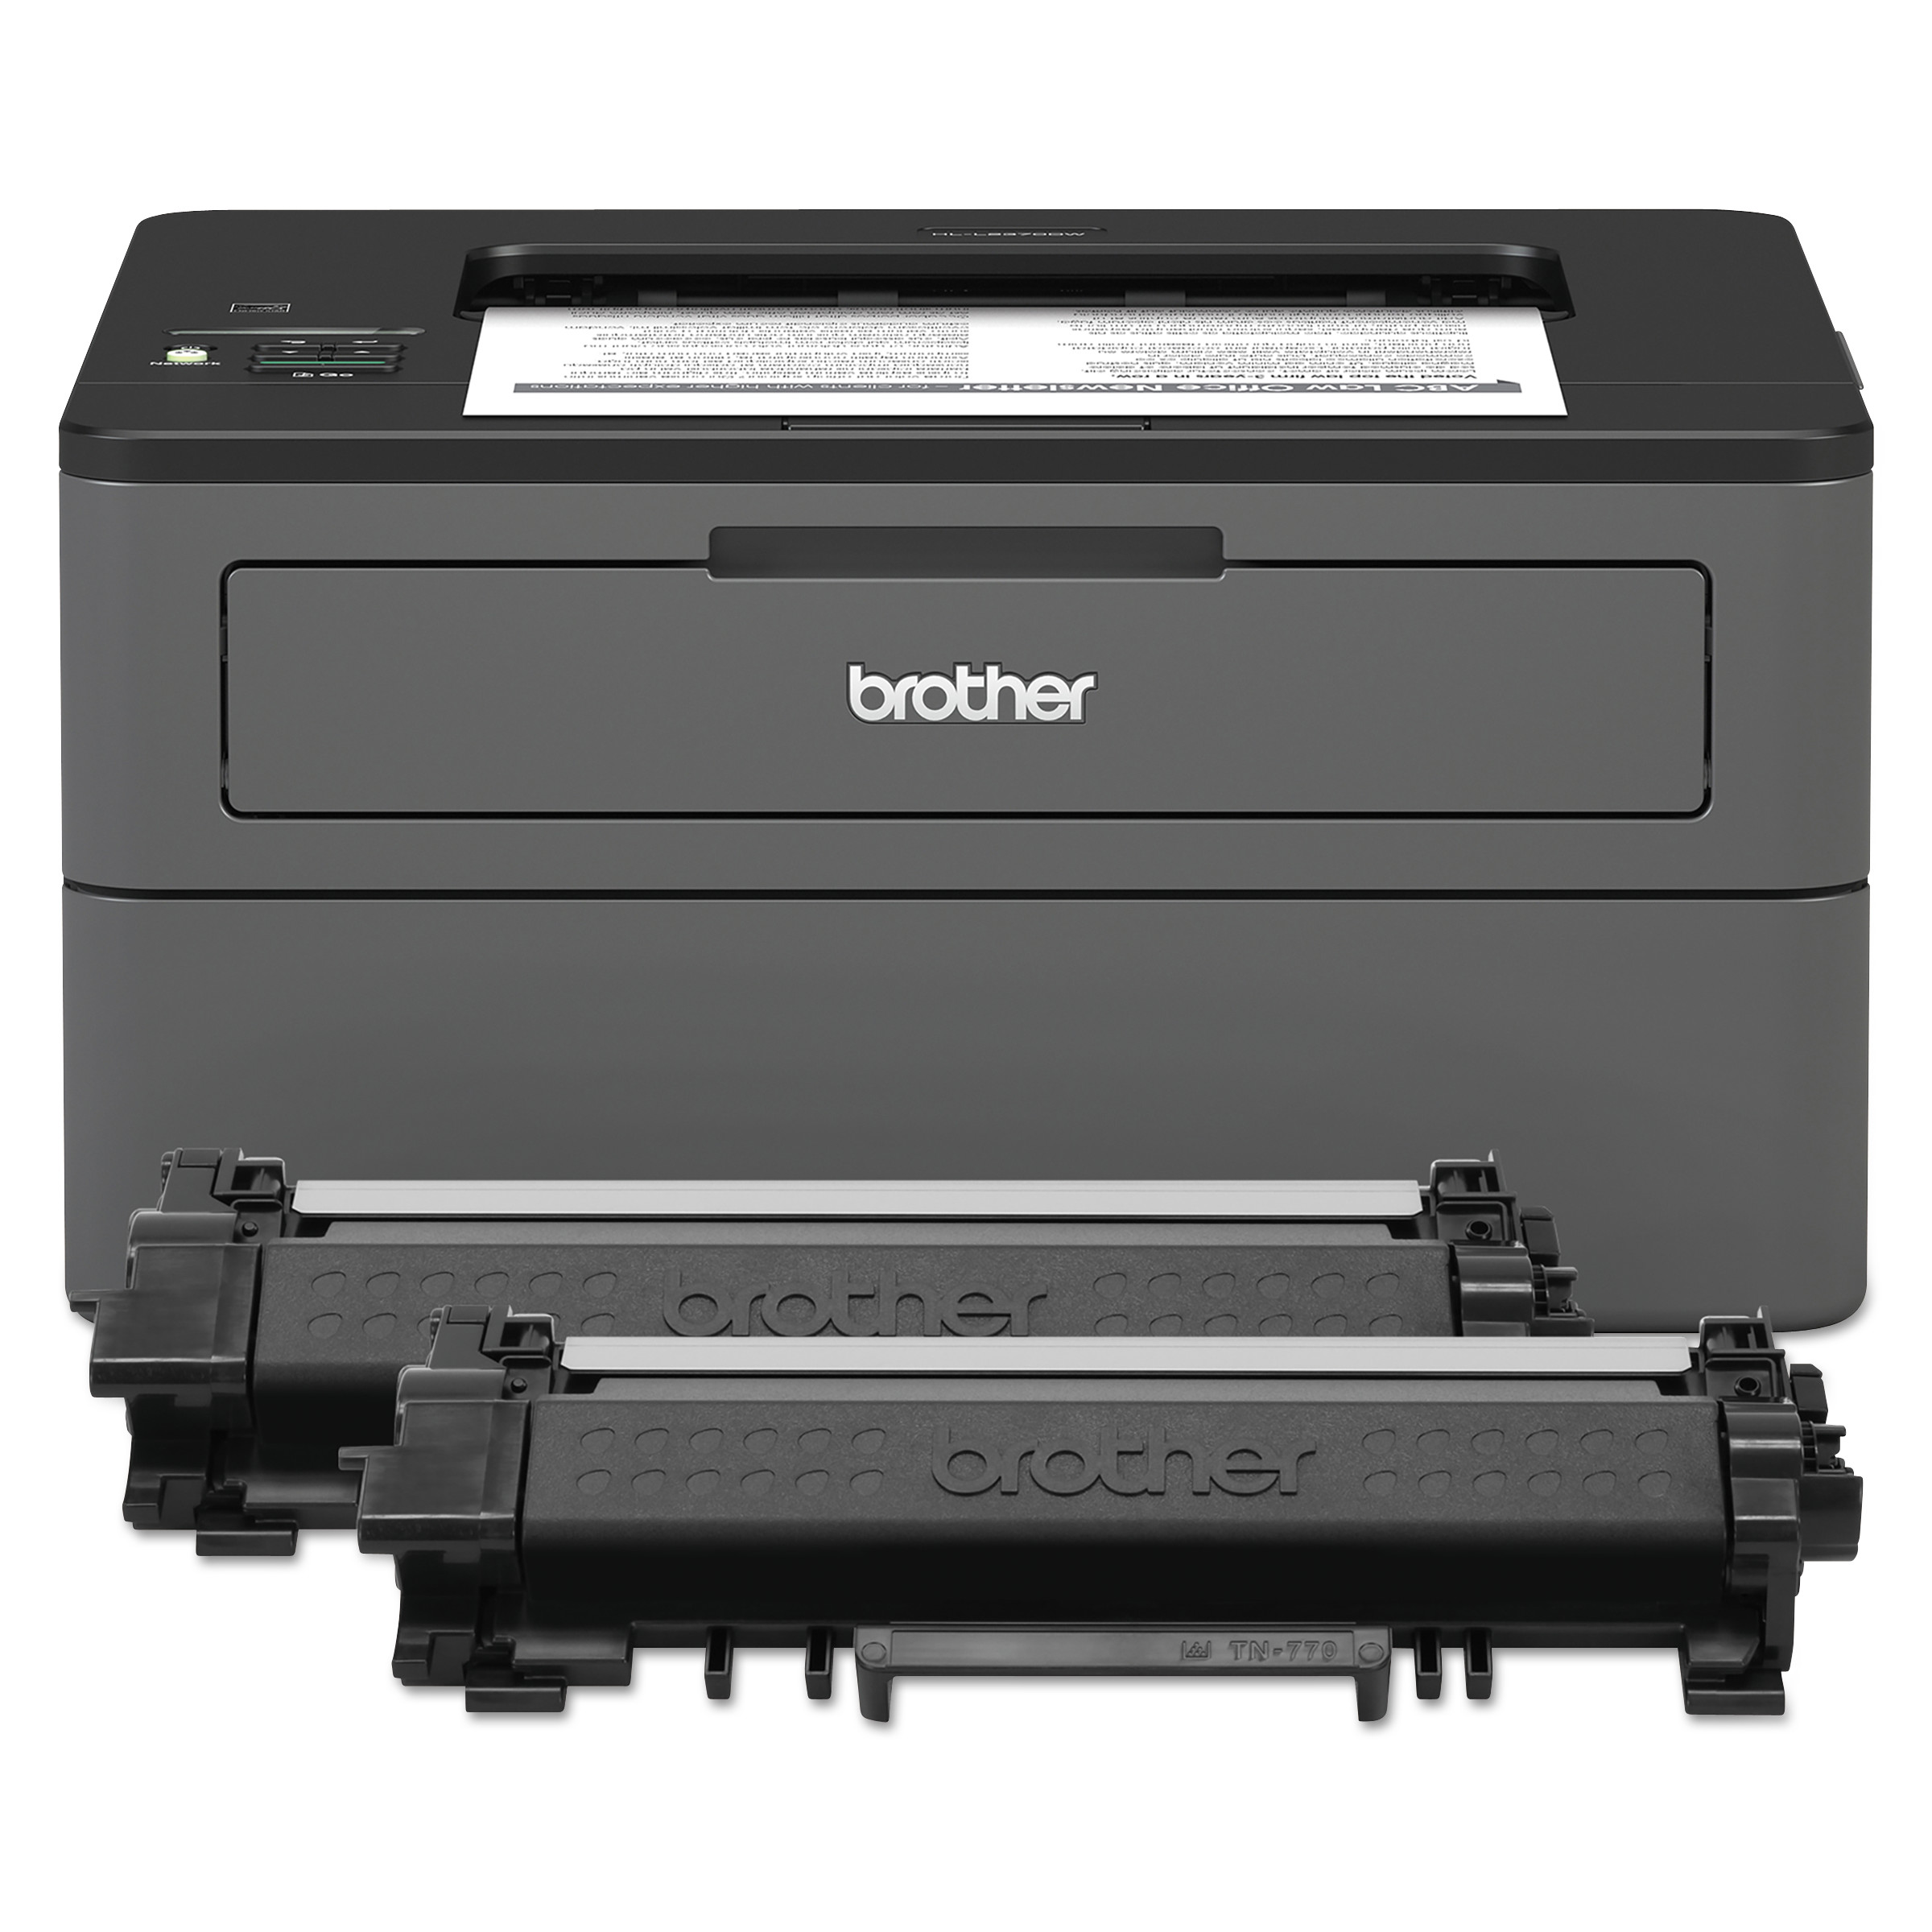 Brother HLL2370DW XL Extended Print Monochrome Laser Printer, up to 2 Years of Toner In-Box - image 1 of 9